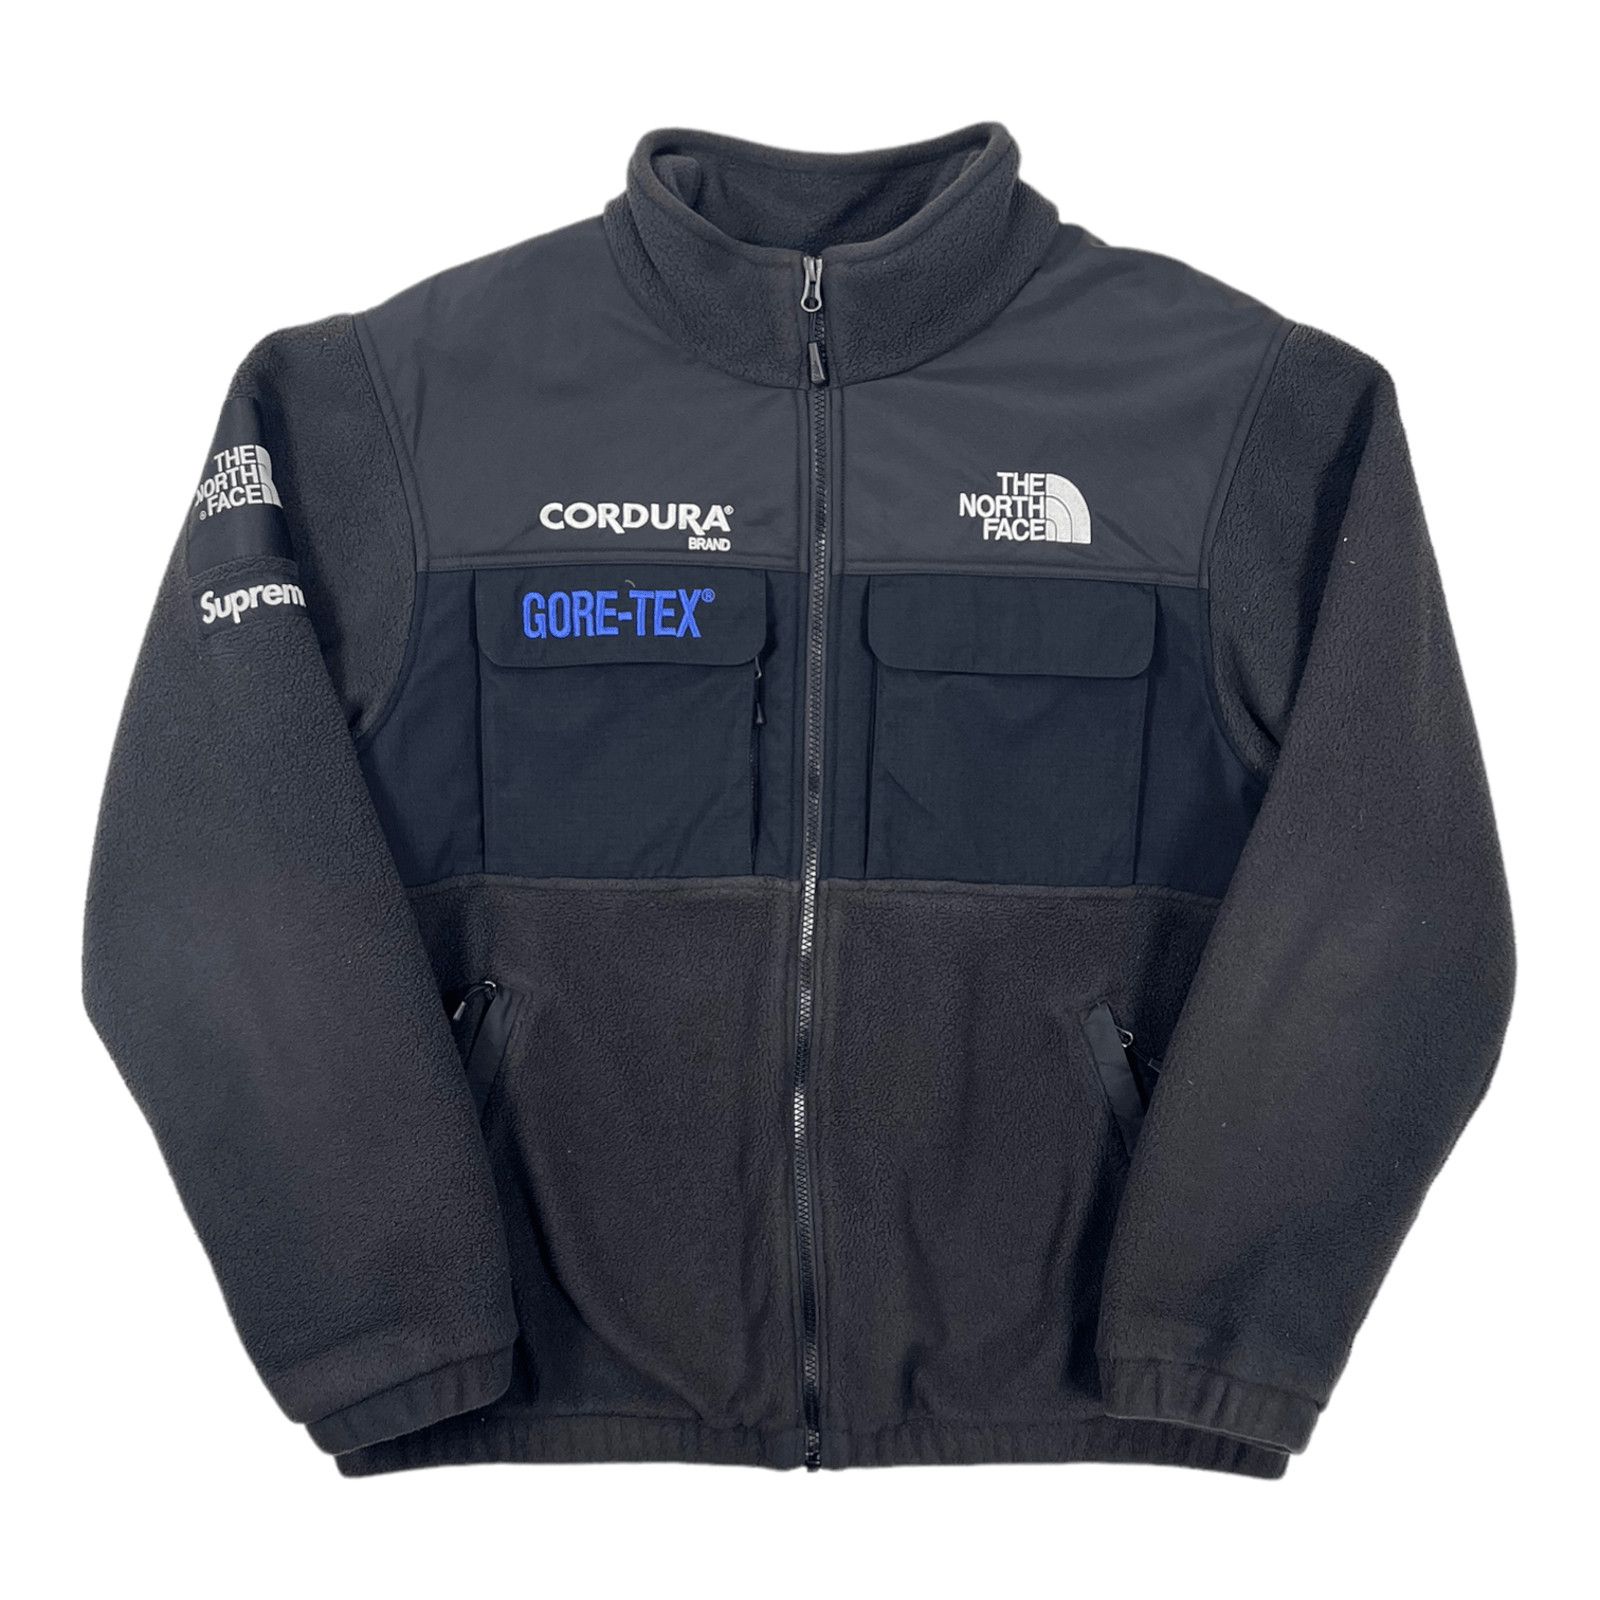 Supreme Supreme The North Face Expedition Fleece (FW18) Jacket | Grailed